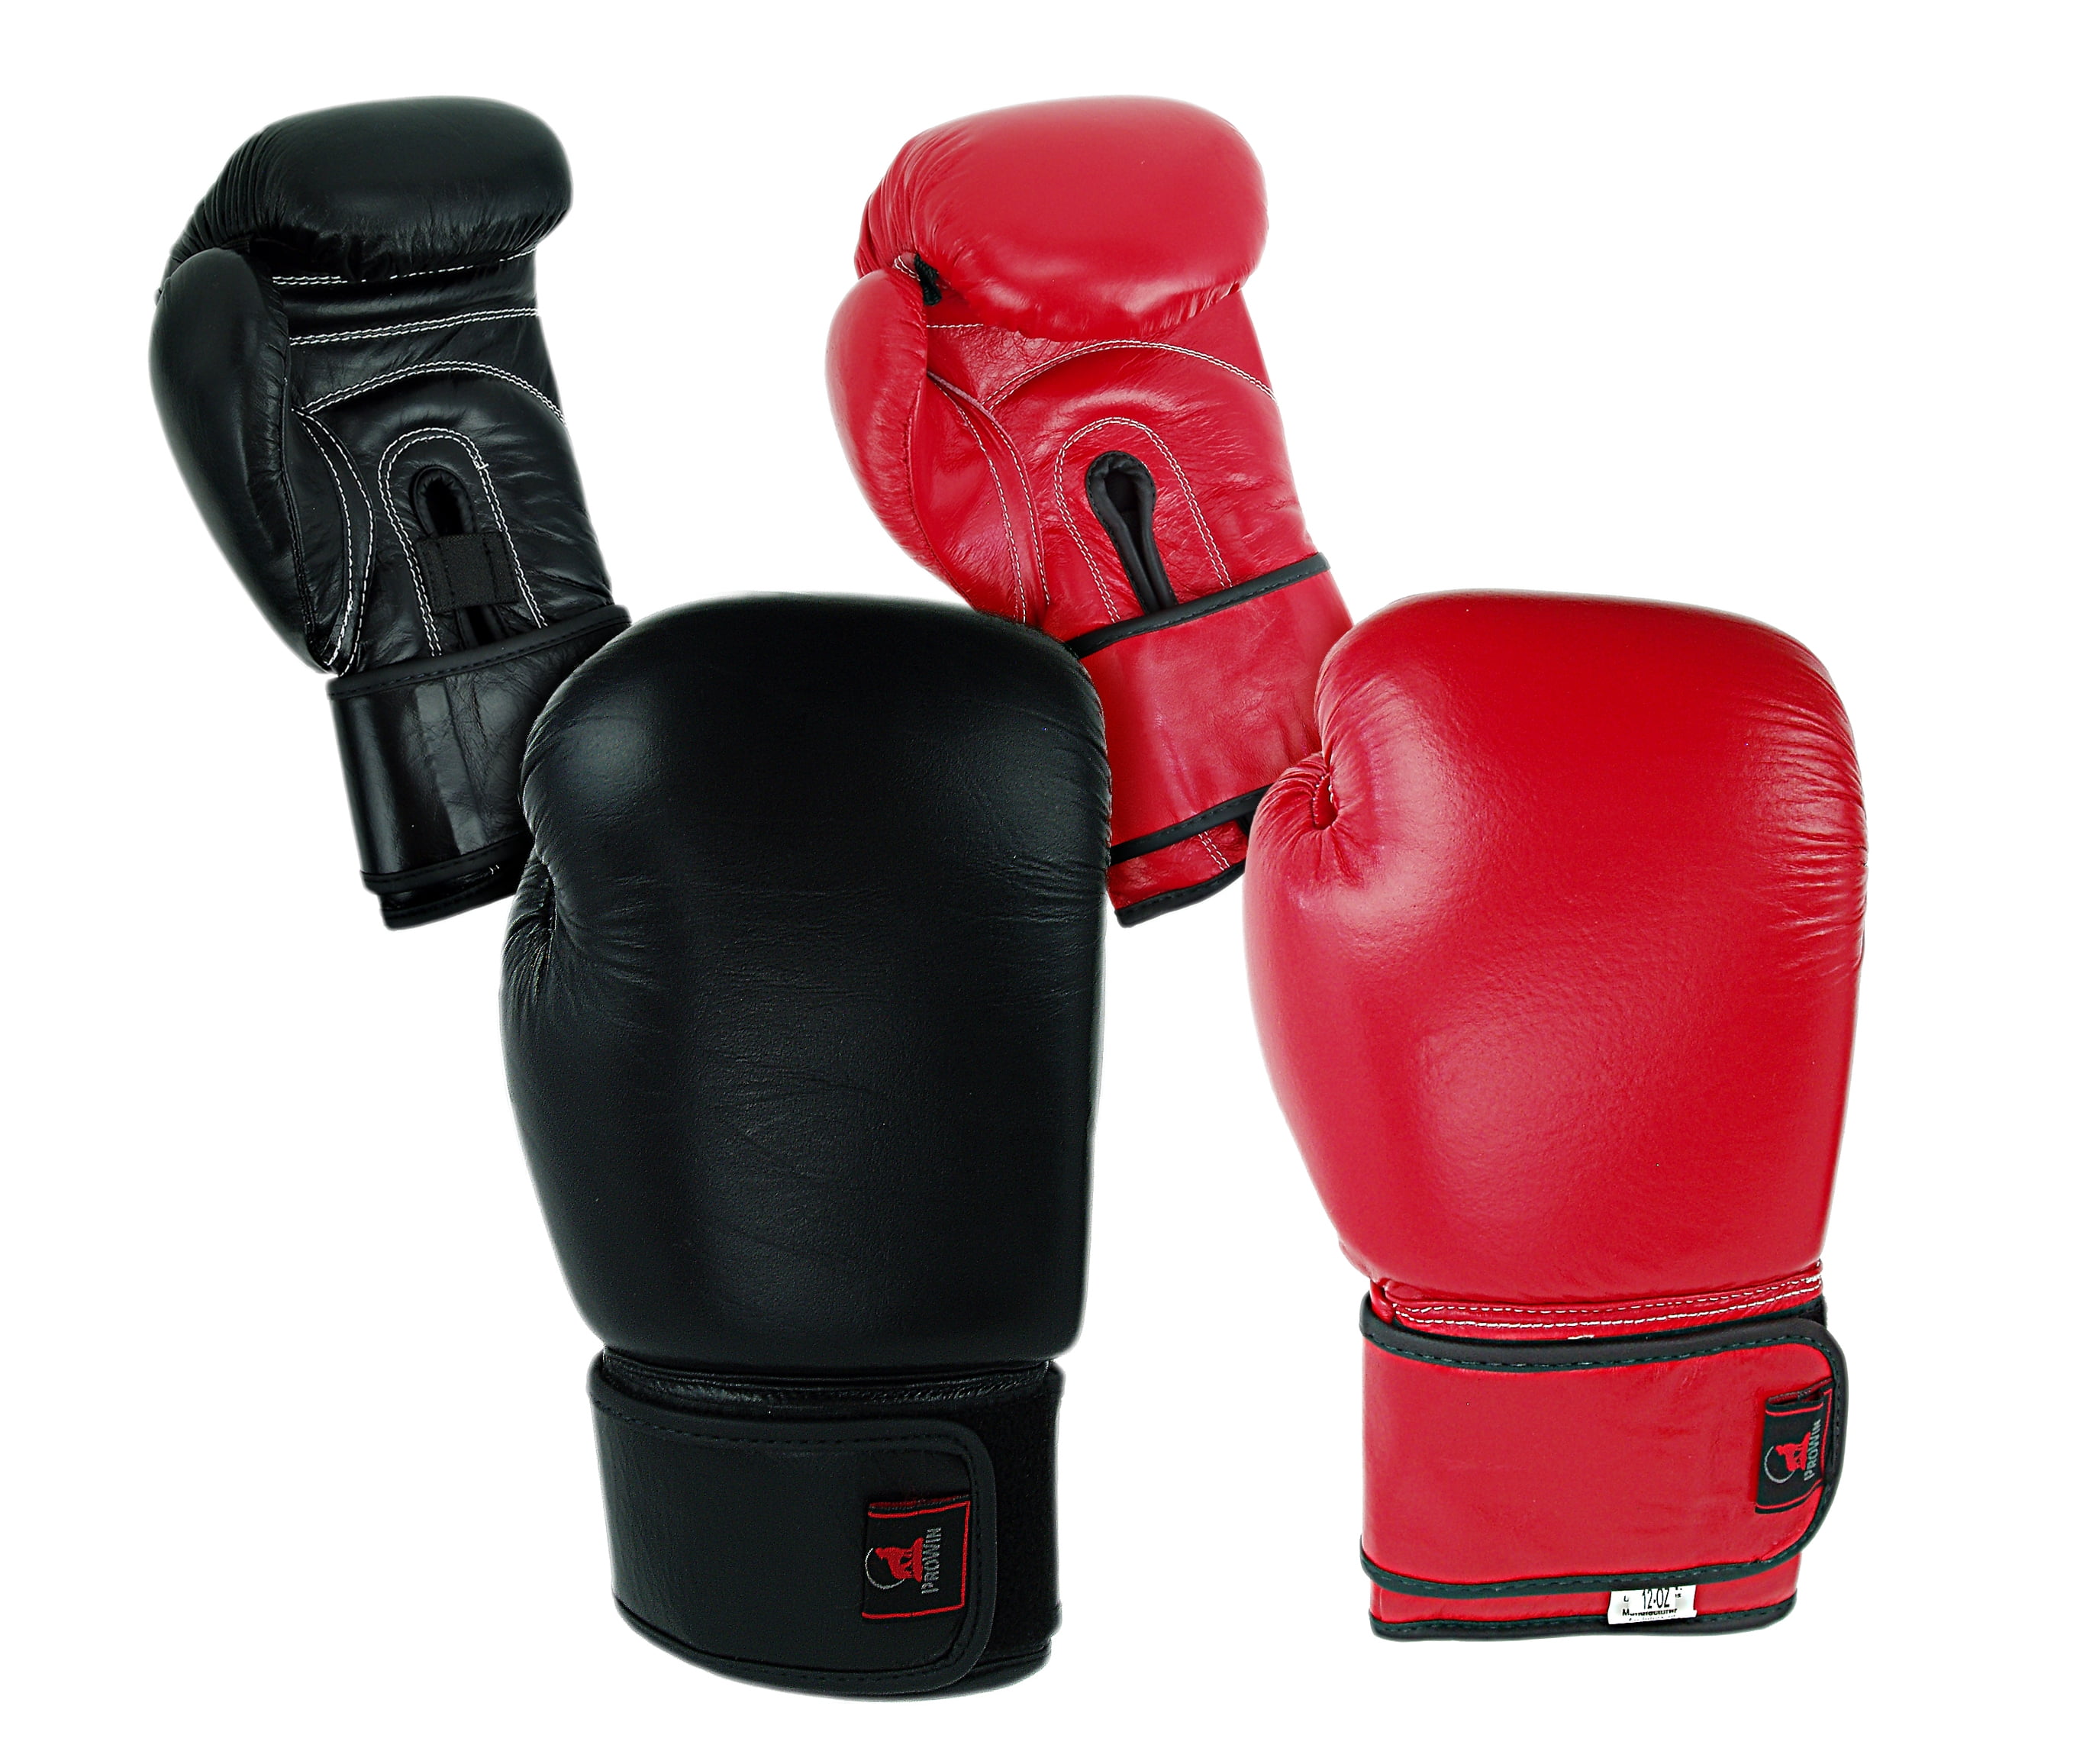 ADii™ Leather Boxing Gloves Sparring Gloves Training MMA Muay Thai Kickboxing 